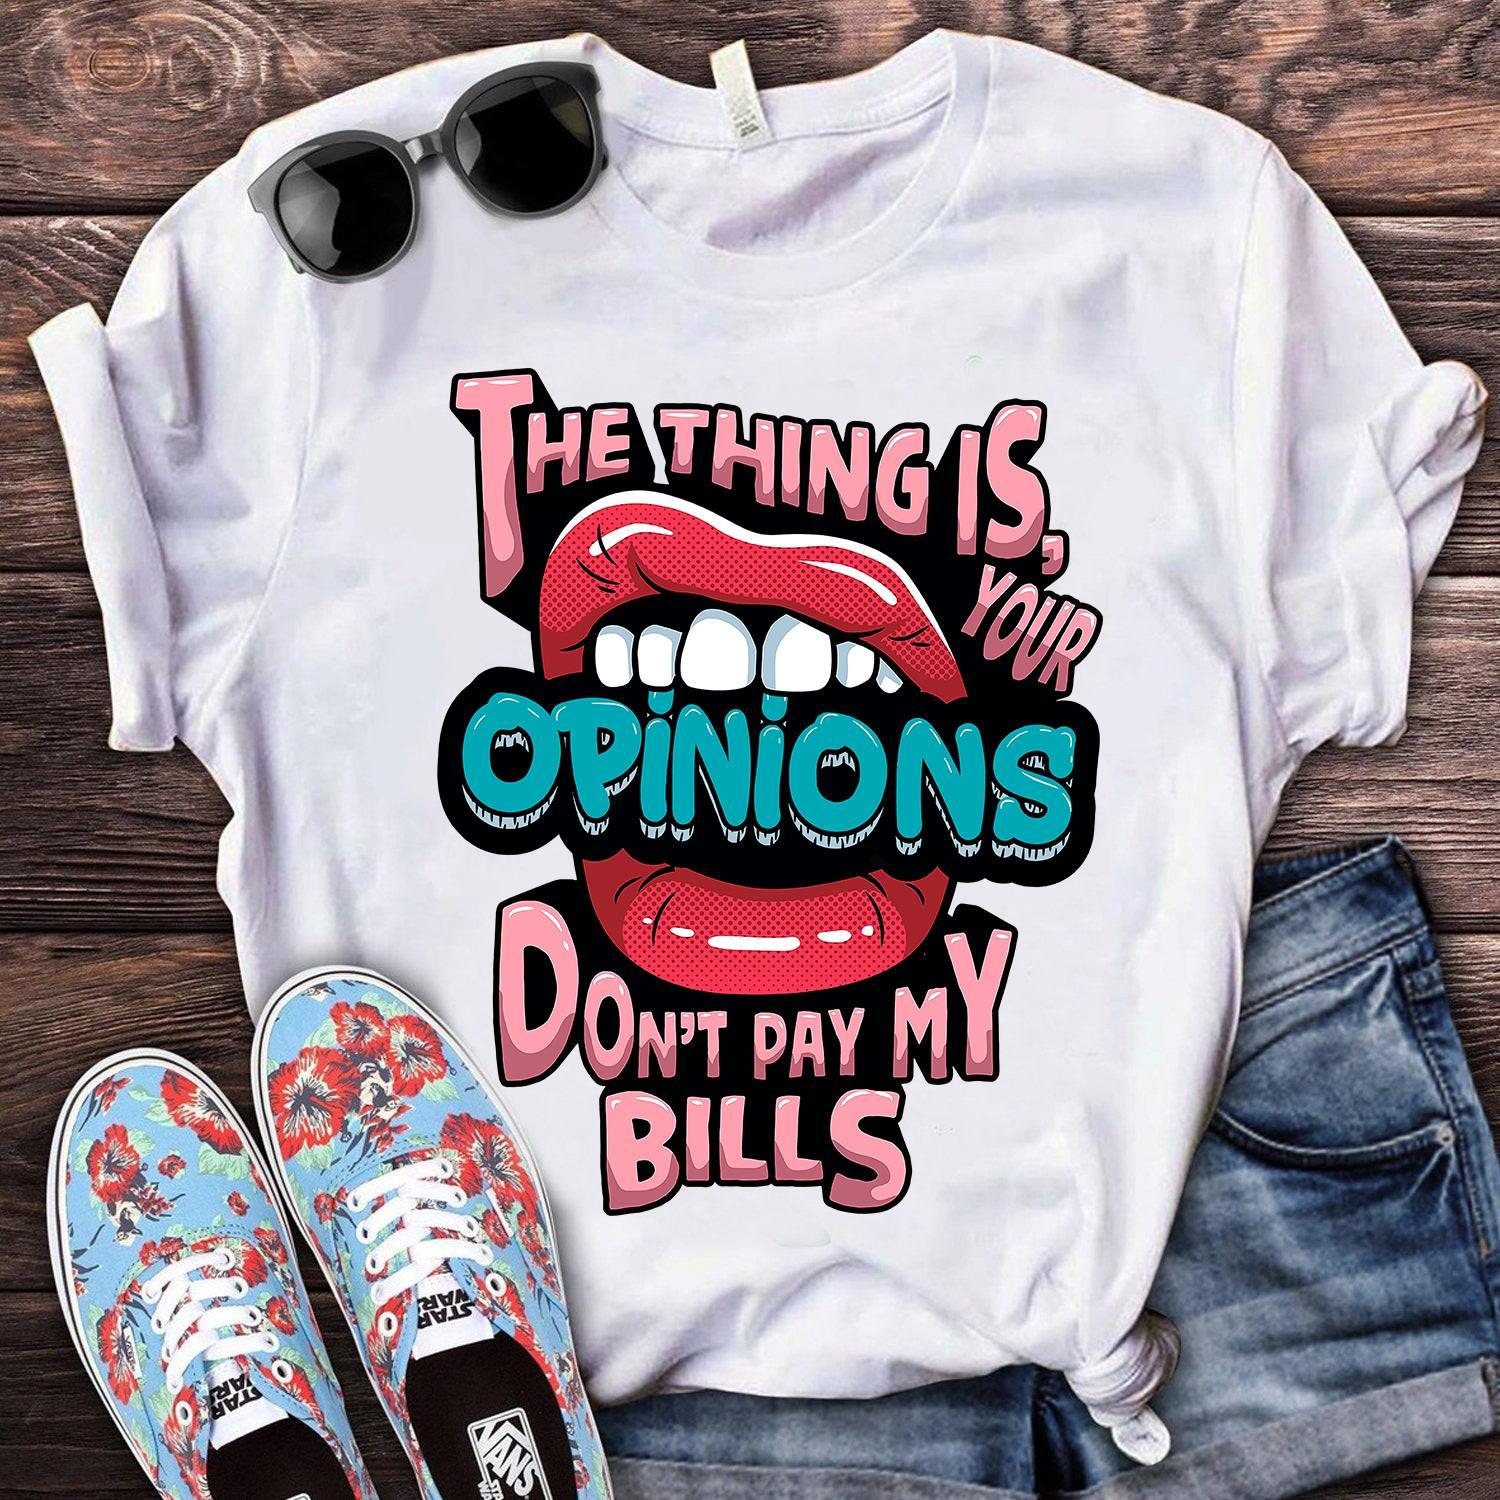 THe thing is your opinions don't pay my bills - Save your opinions, lip graphic T-shirt